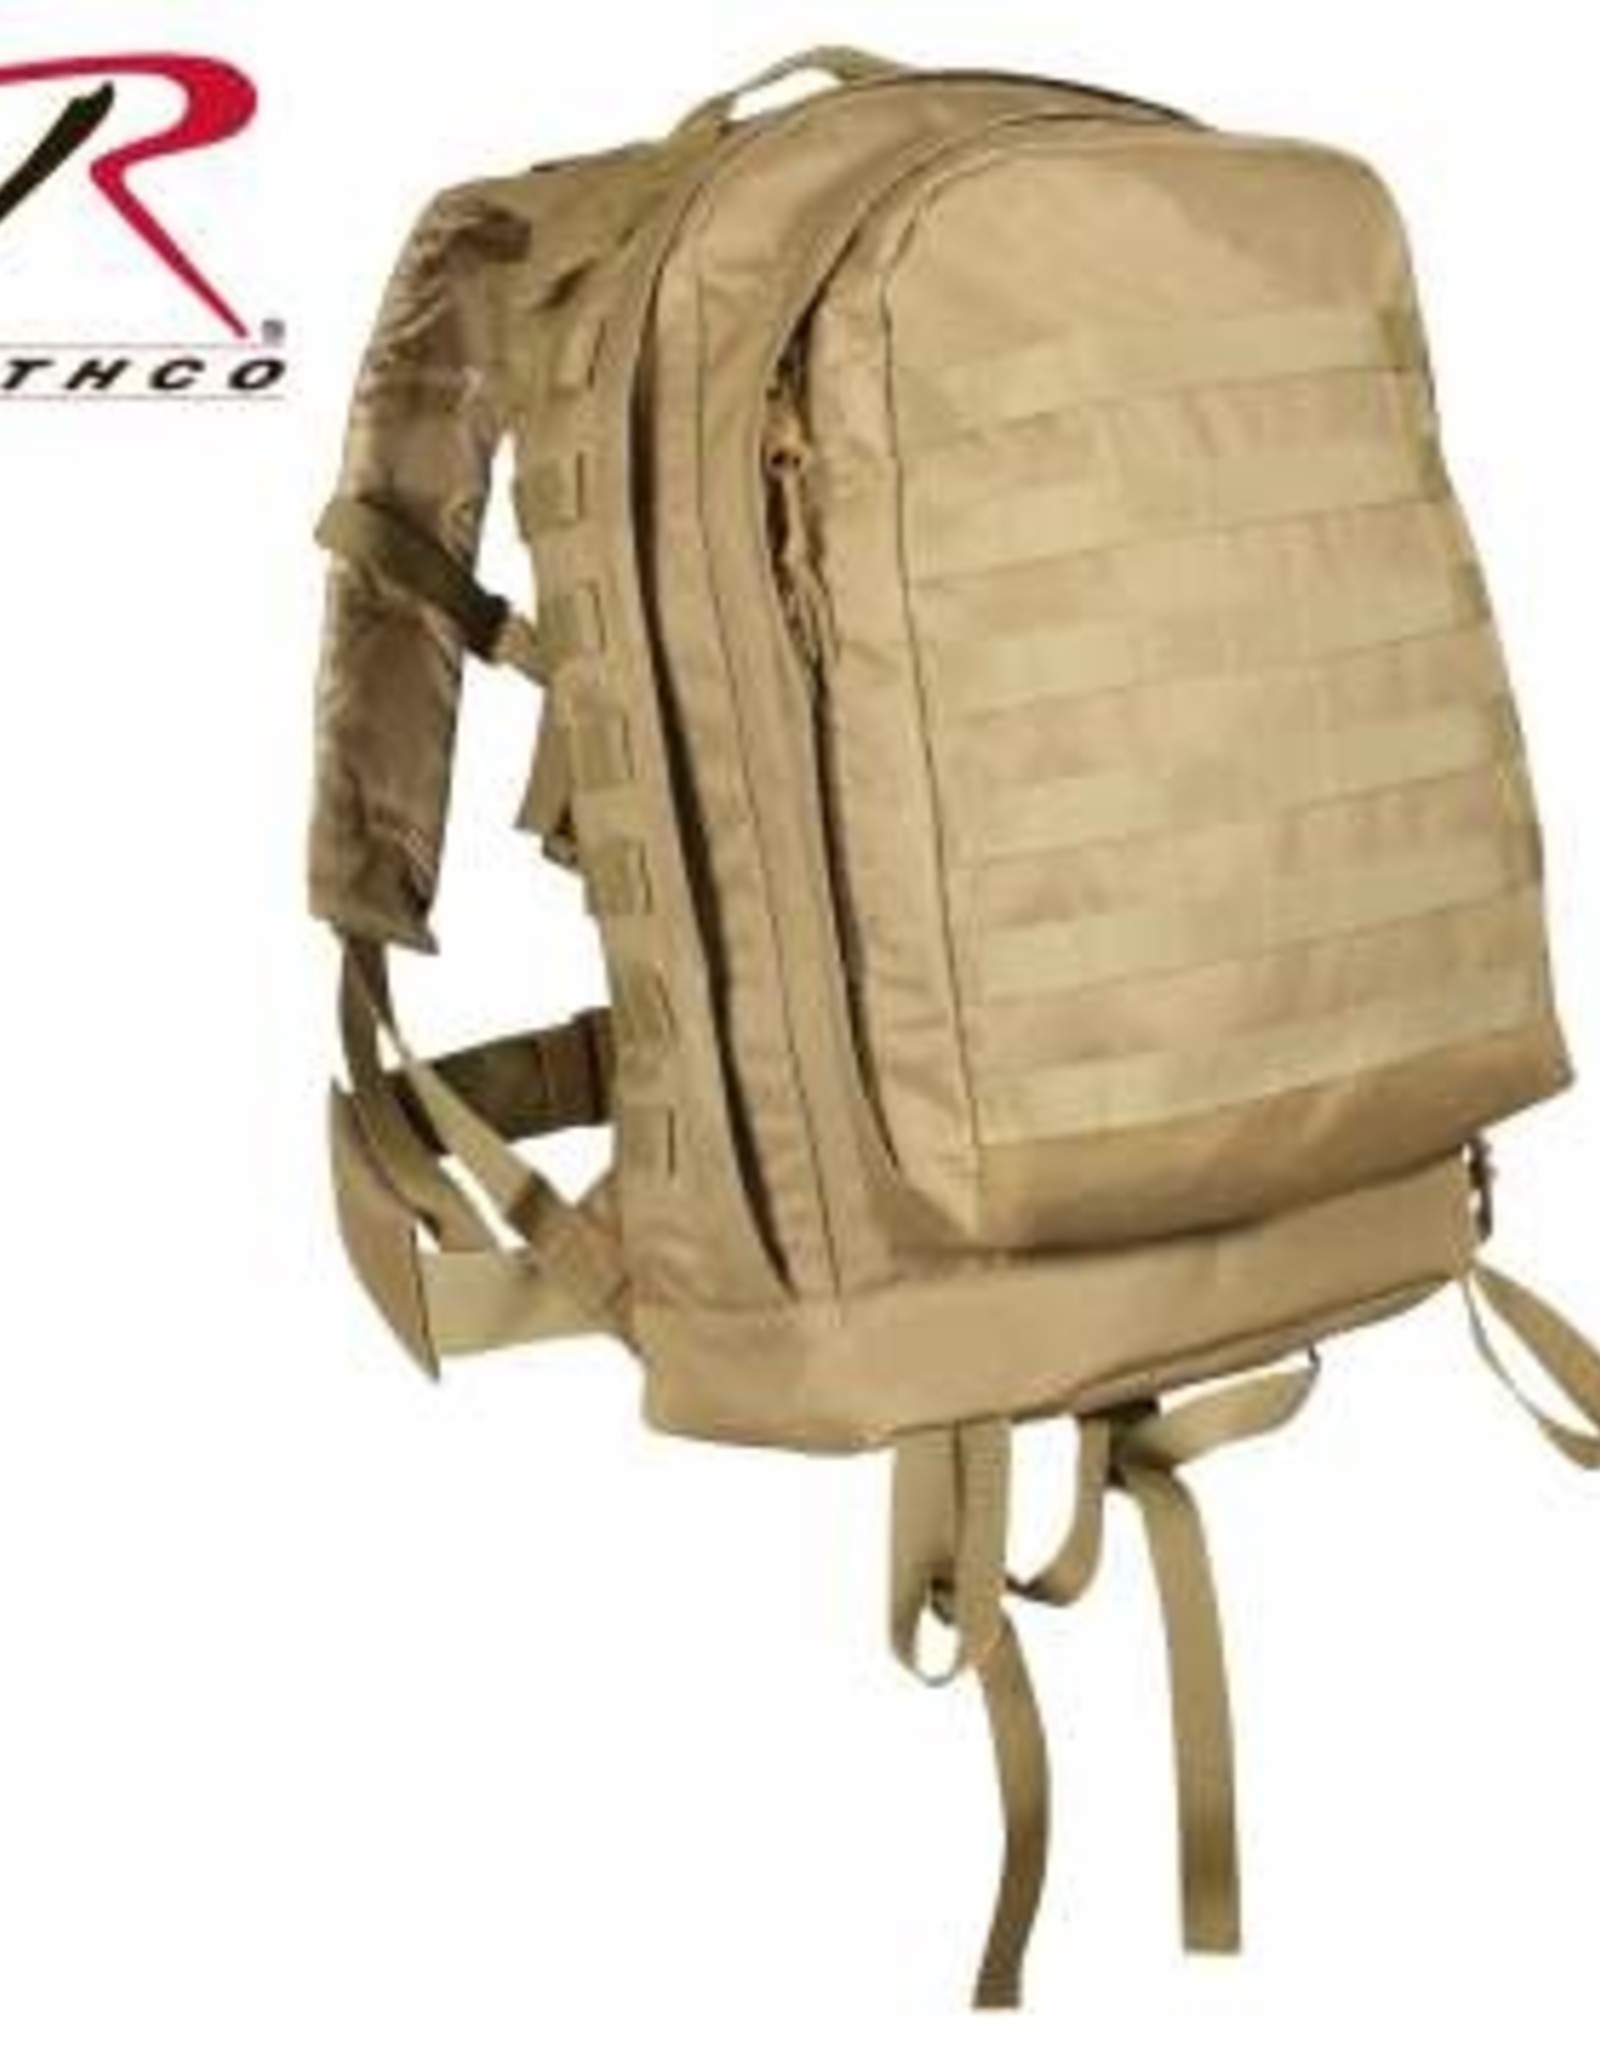 ROTHCO MOLLE 3 DAY ASSAULT PACK